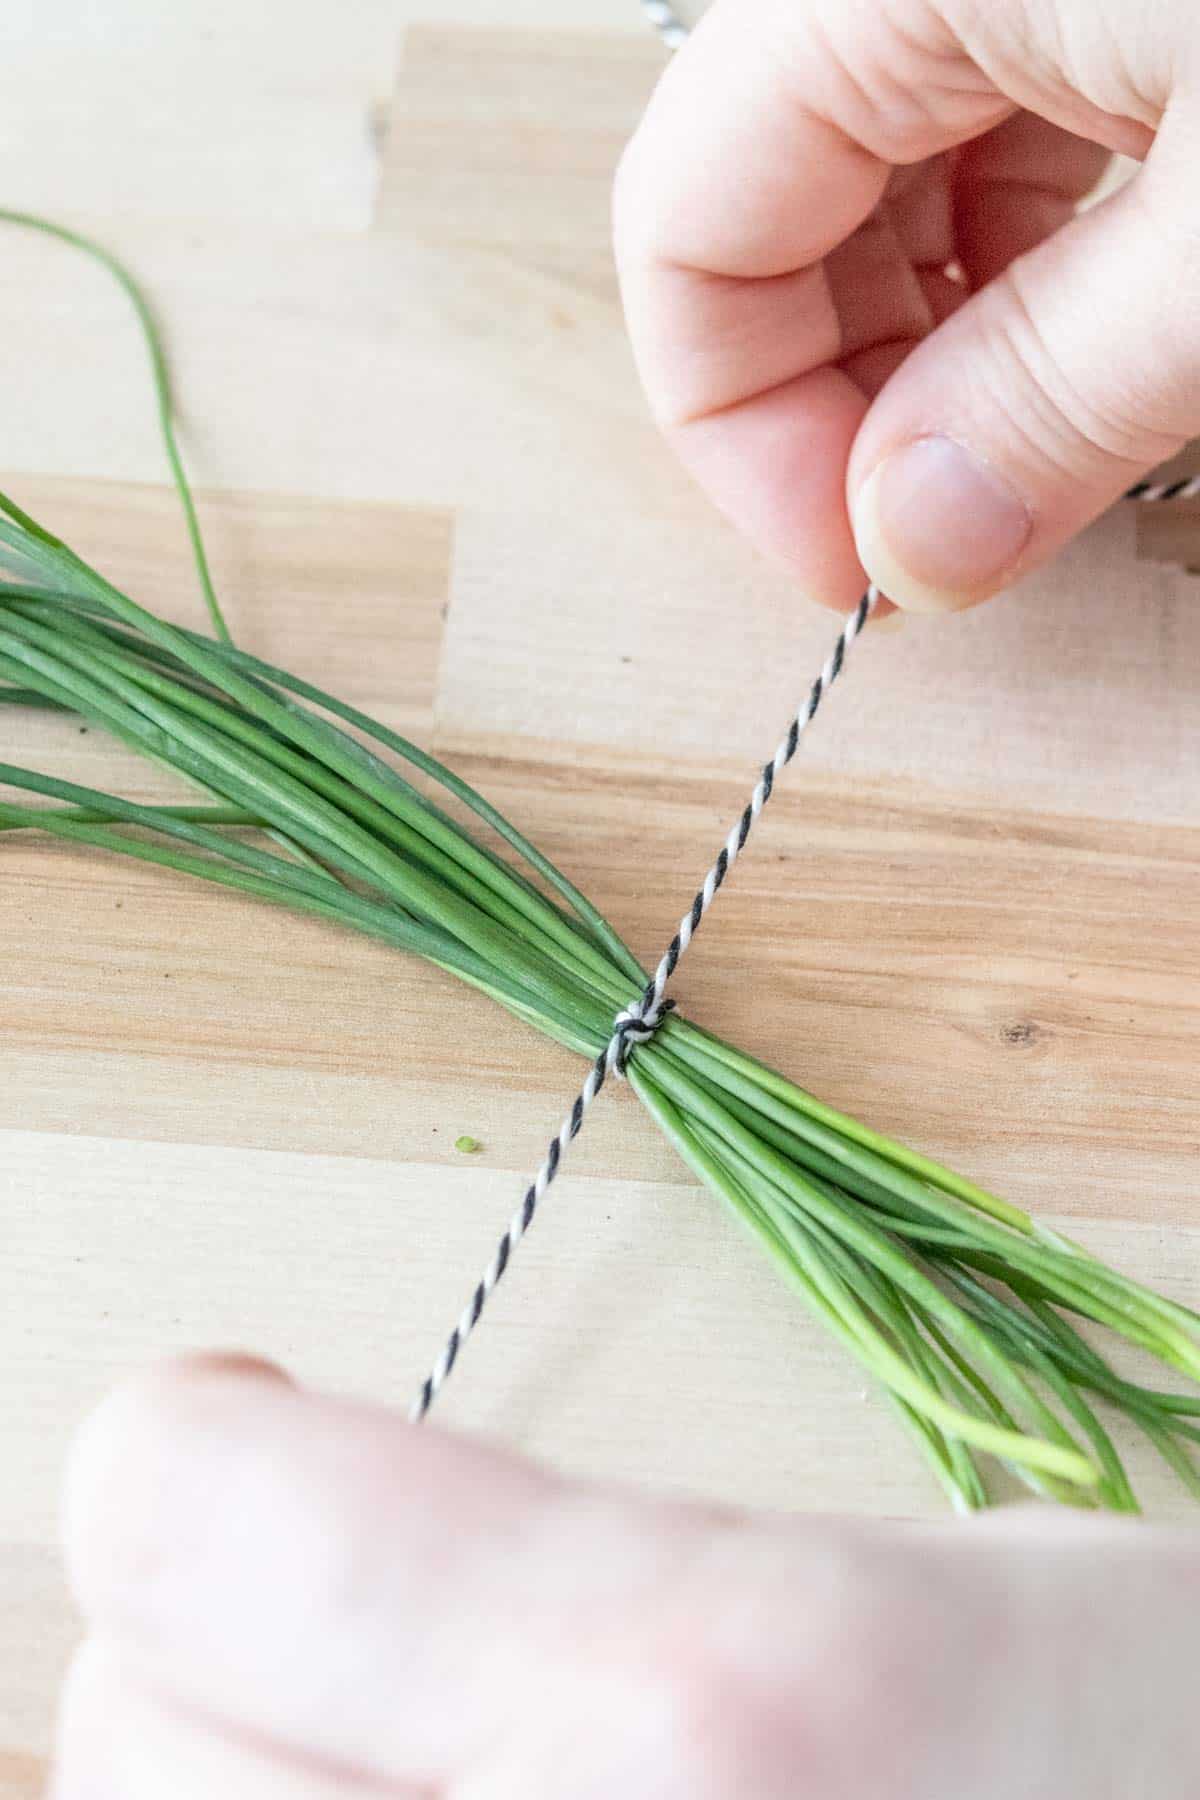 Caucasian hands tying a string around chives.